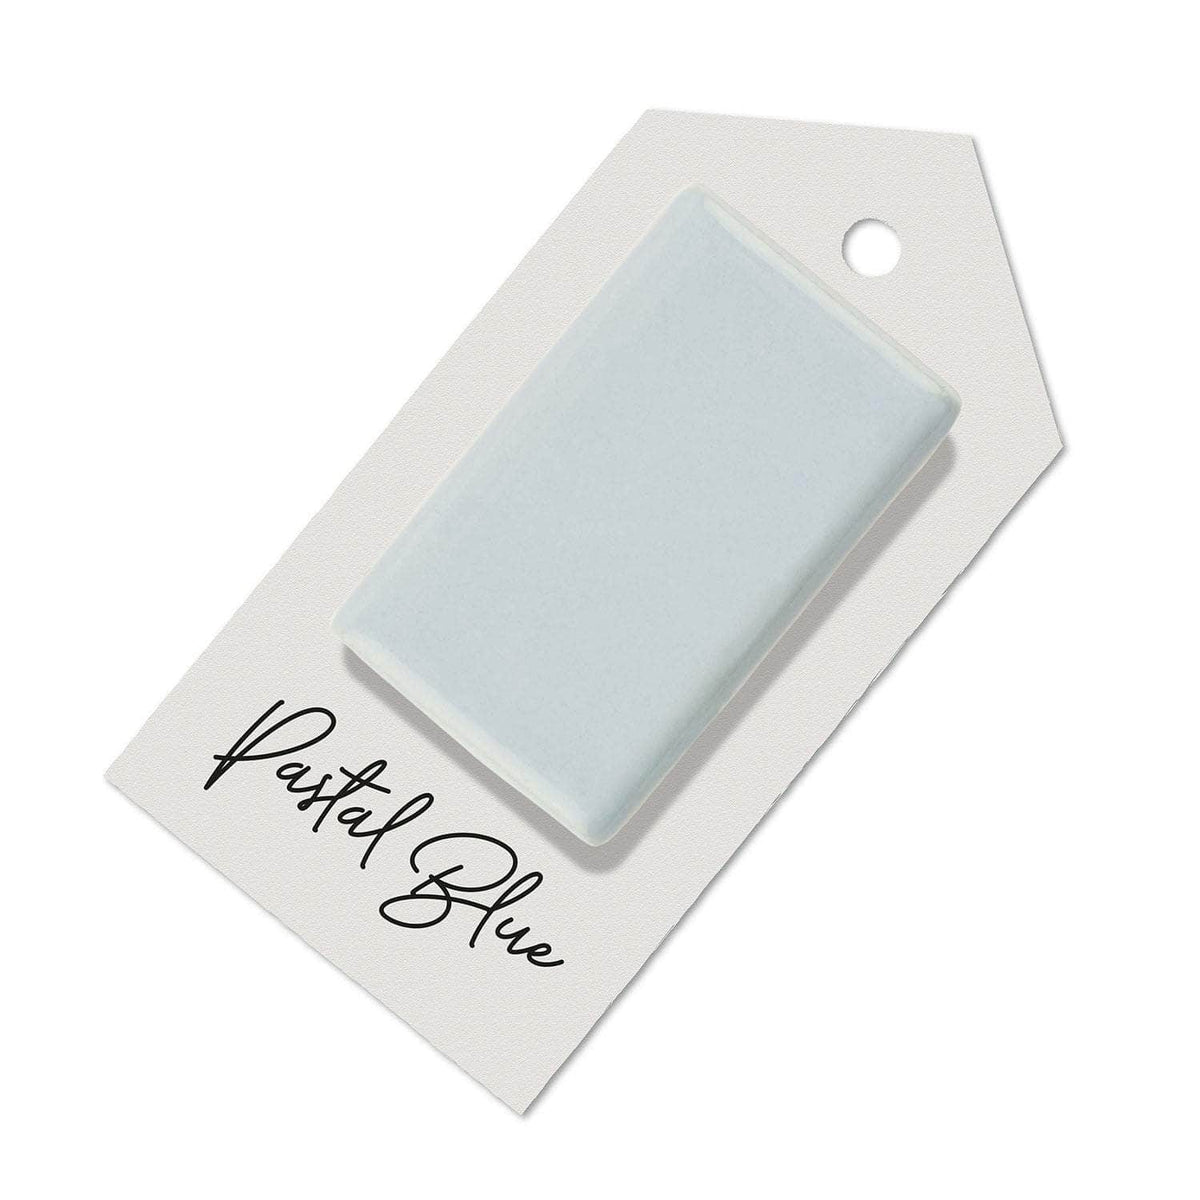 Pastal Blue sample for Aga range cooker re-enamelling &amp; reconditioned cookers